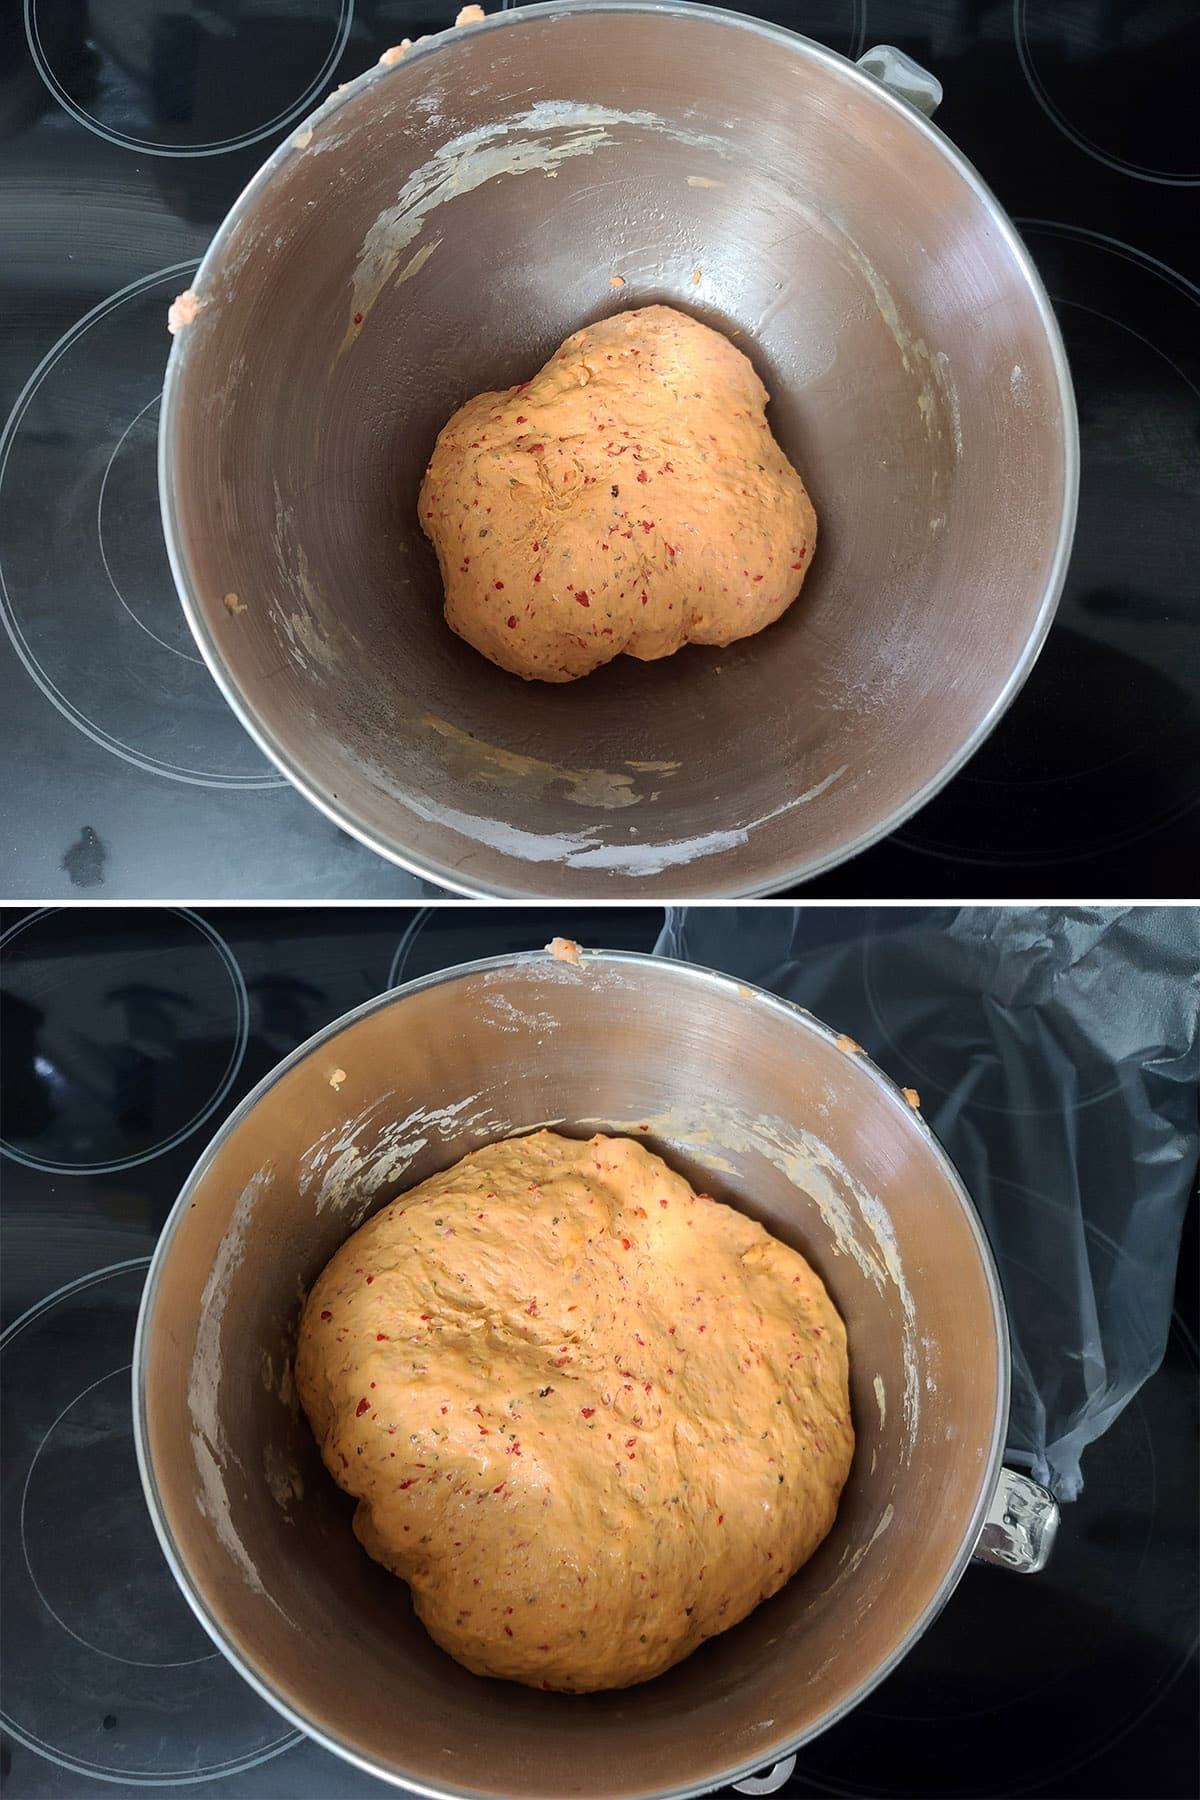 A 2 part image showing the dough before and after rising and doubling in size.